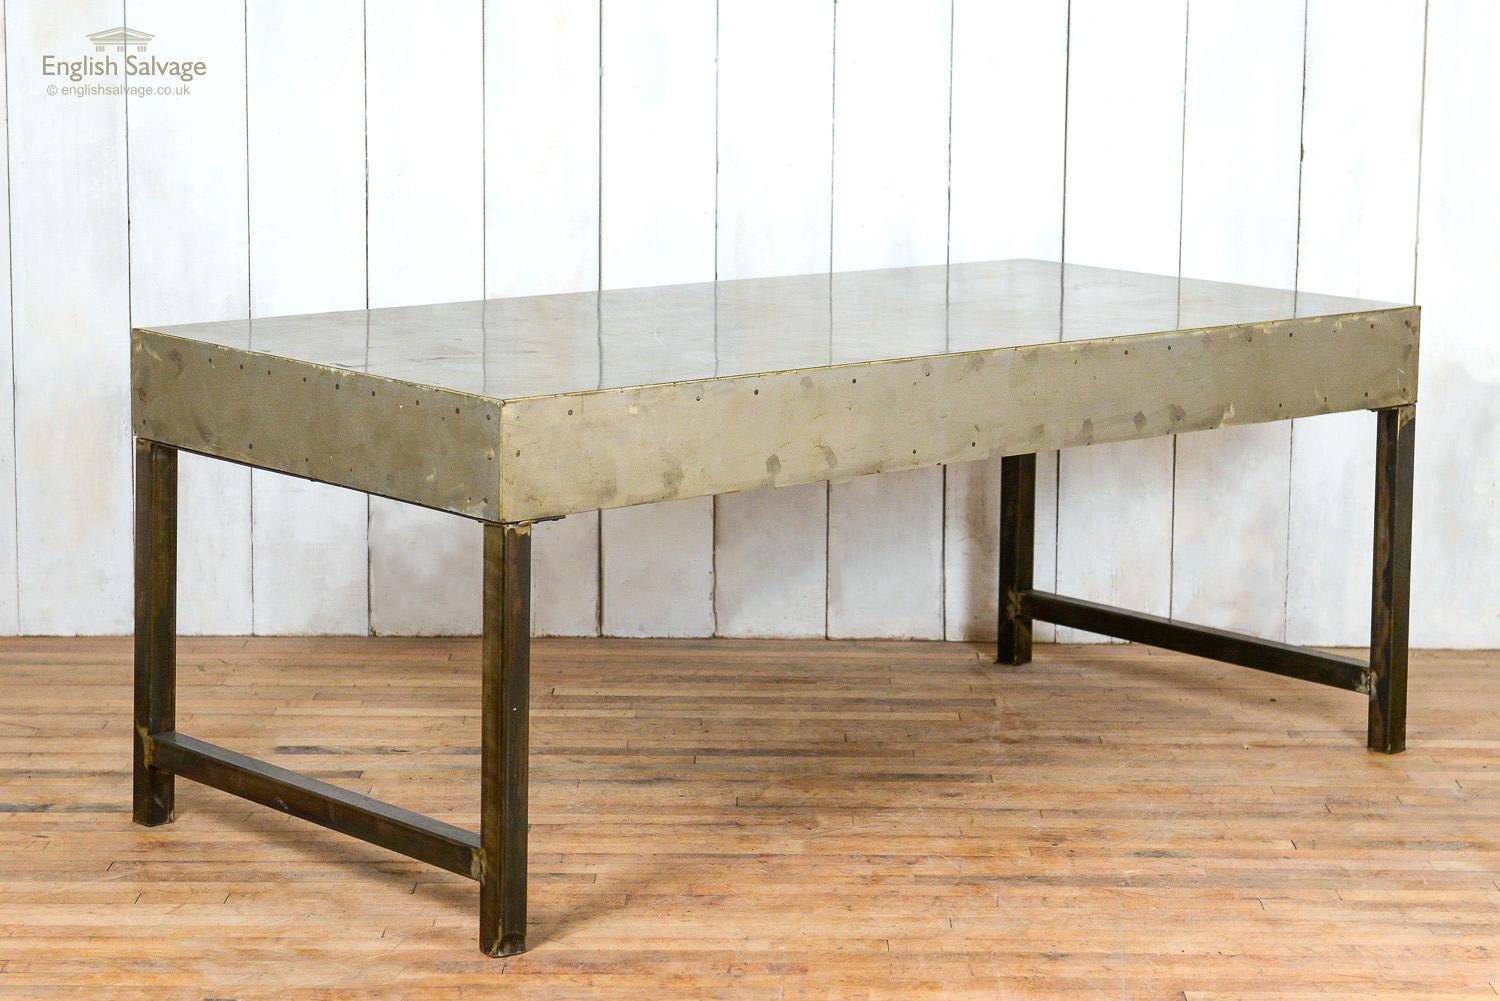 Industrial style polished metal table with faux rivet marks. Legs can be unbolted.